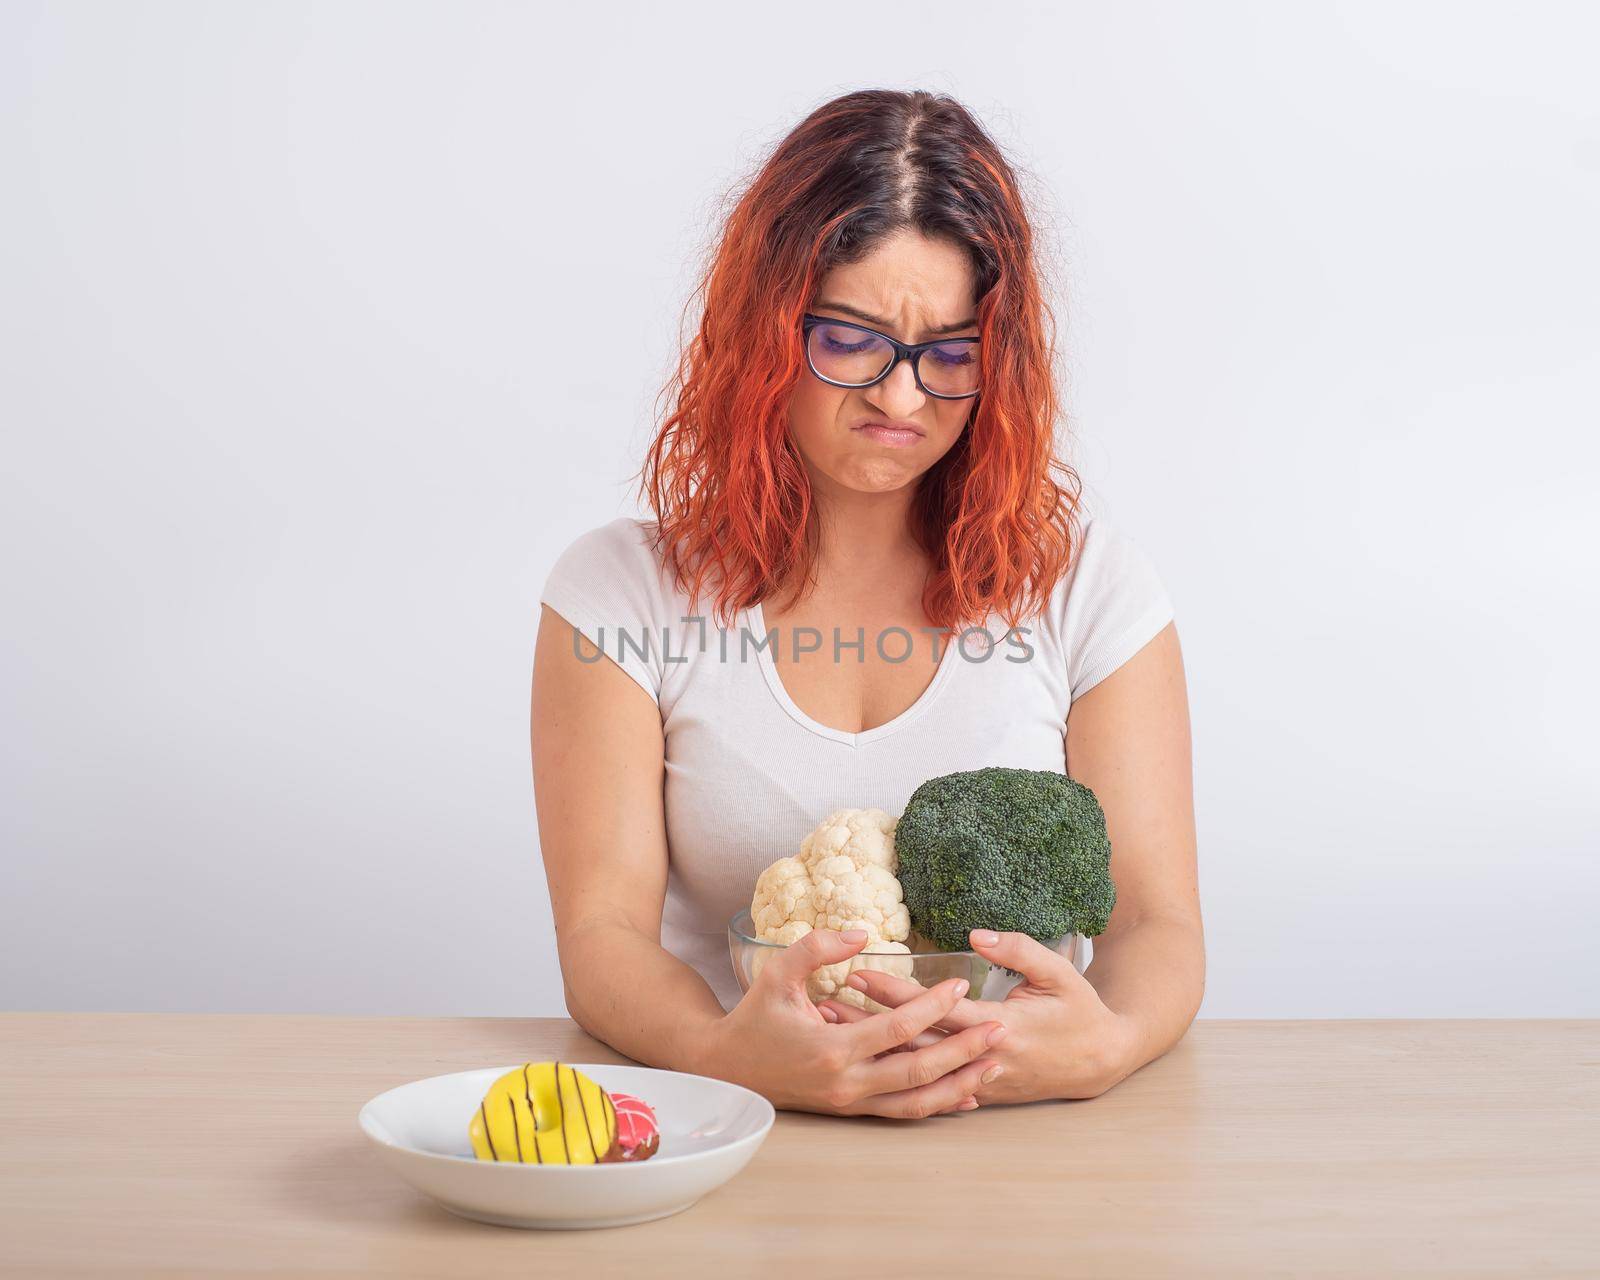 Caucasian woman on a diet dreaming of fast food. Redhead girl chooses between broccoli and donuts on white background. by mrwed54